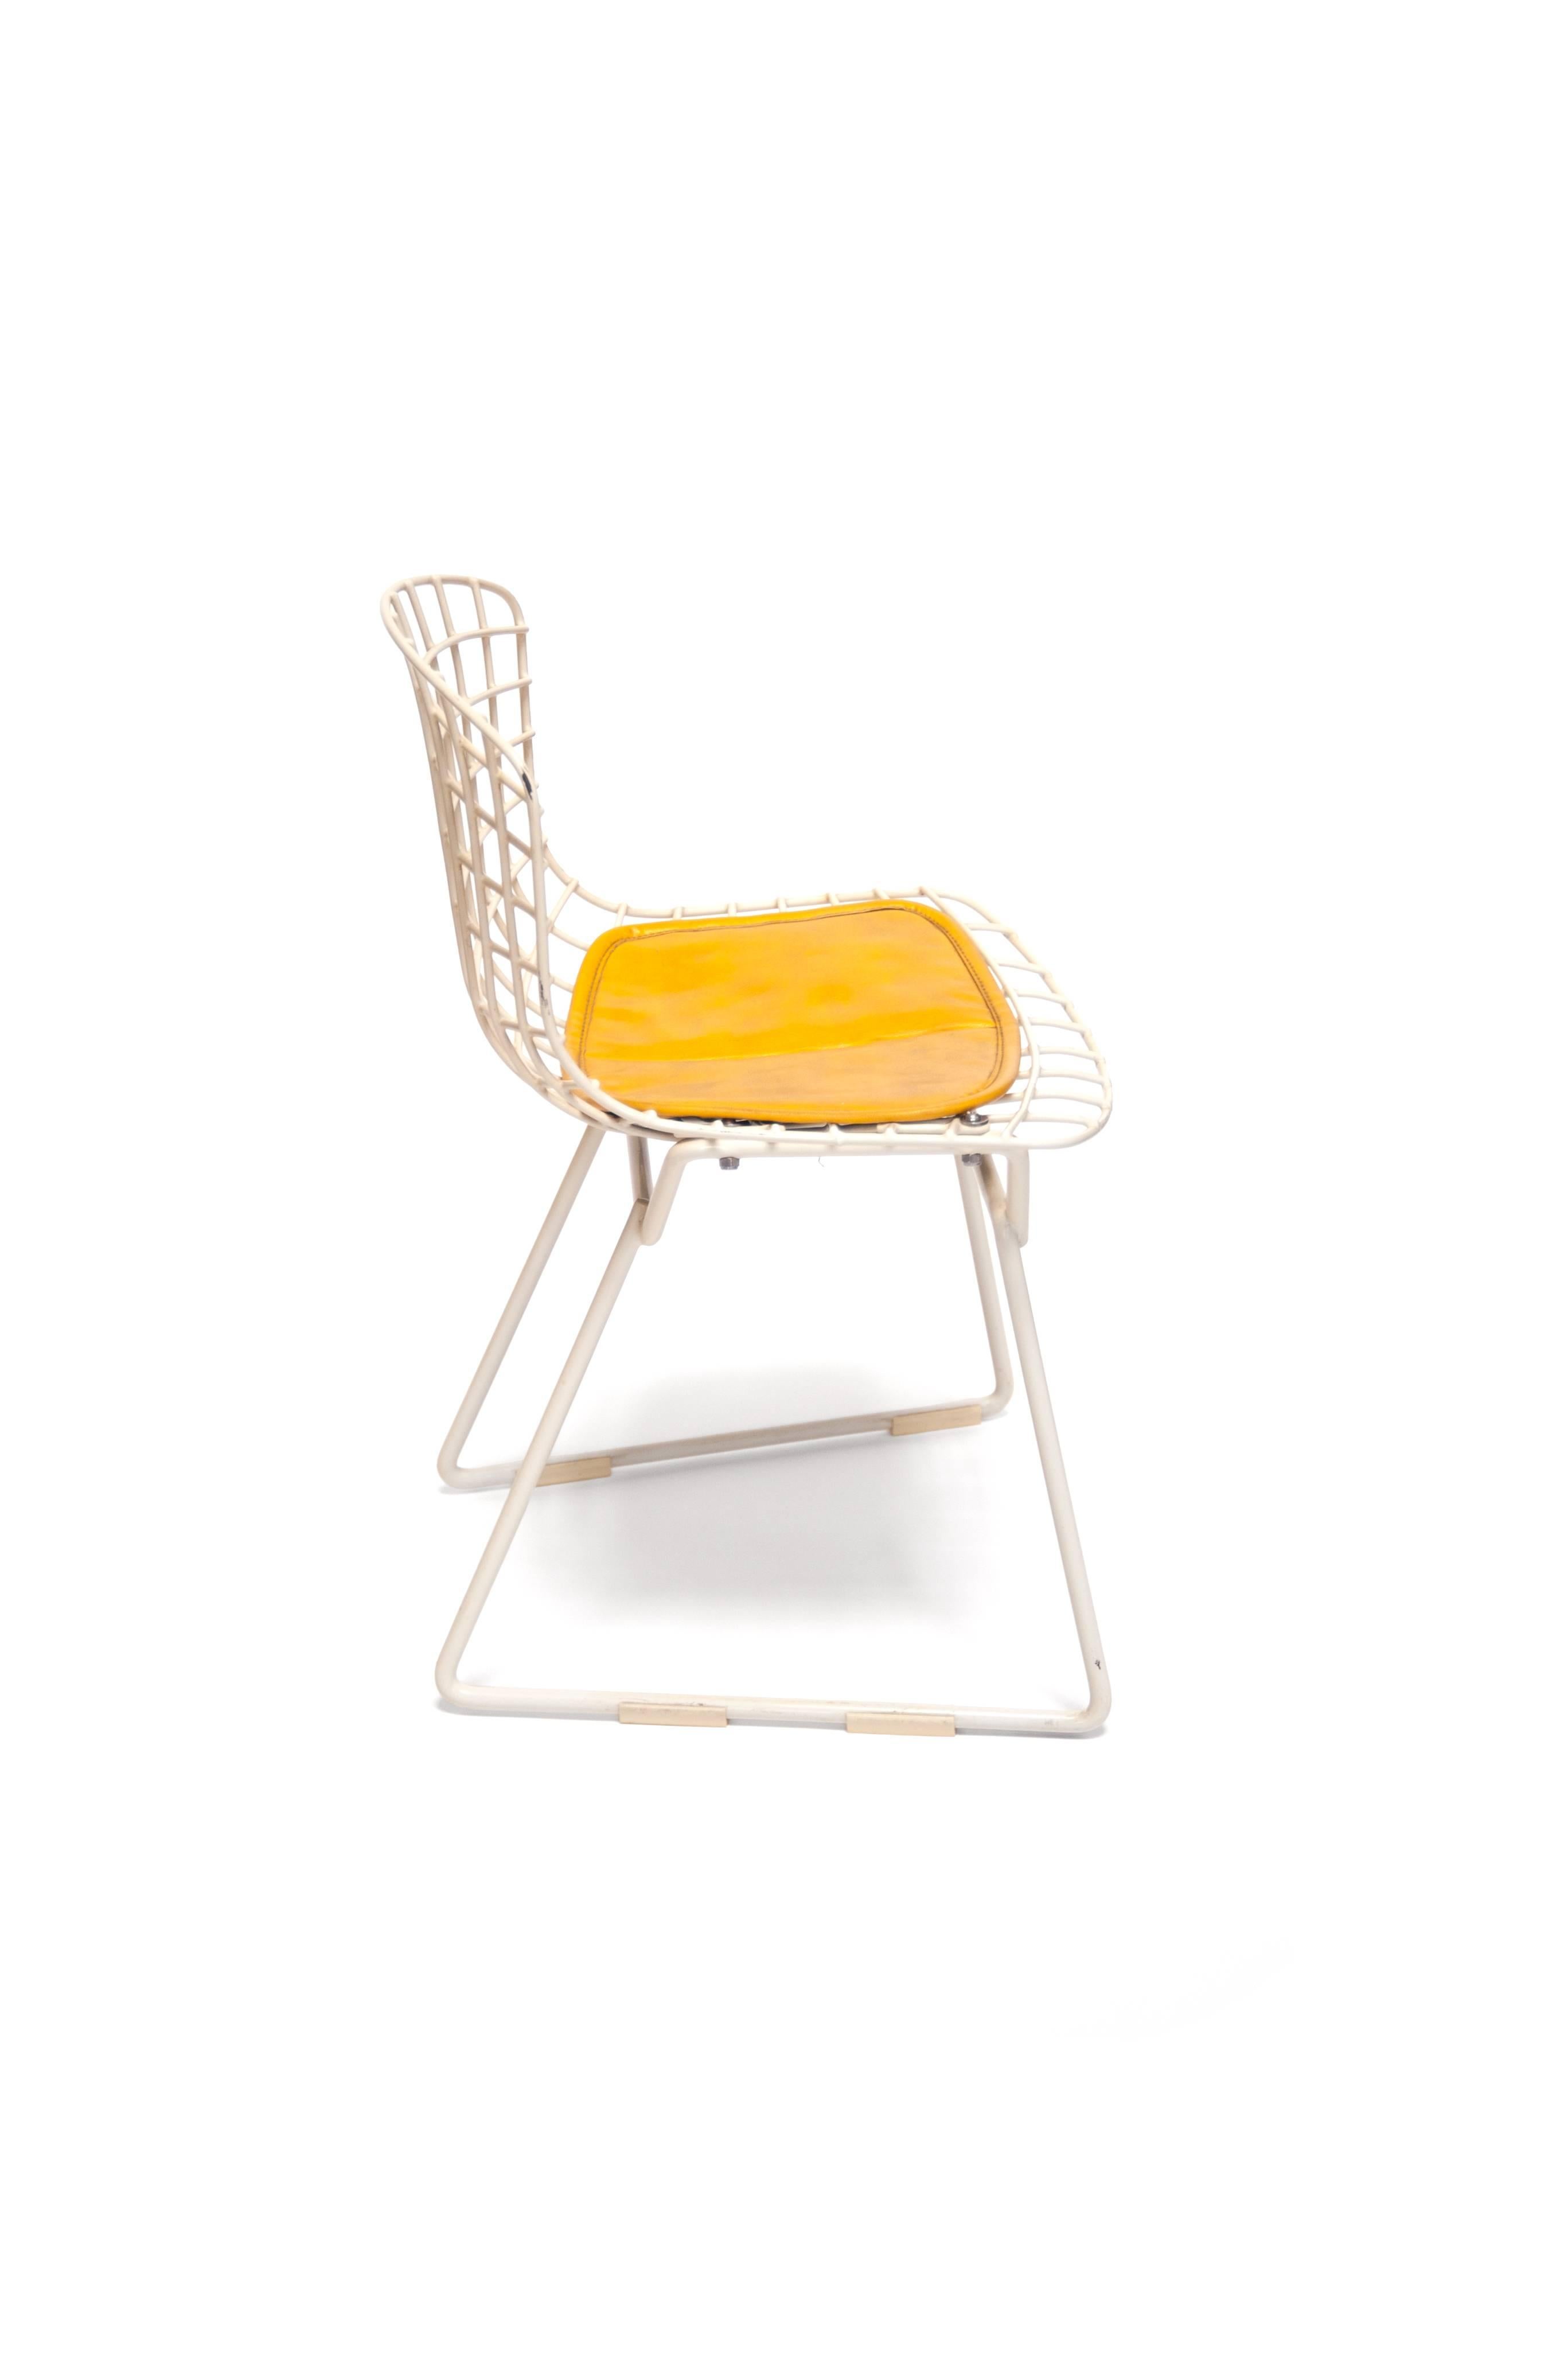 American Bertoia Baby Chair with Cushion, Harry Bertoia for Knoll, USA, 1960s For Sale